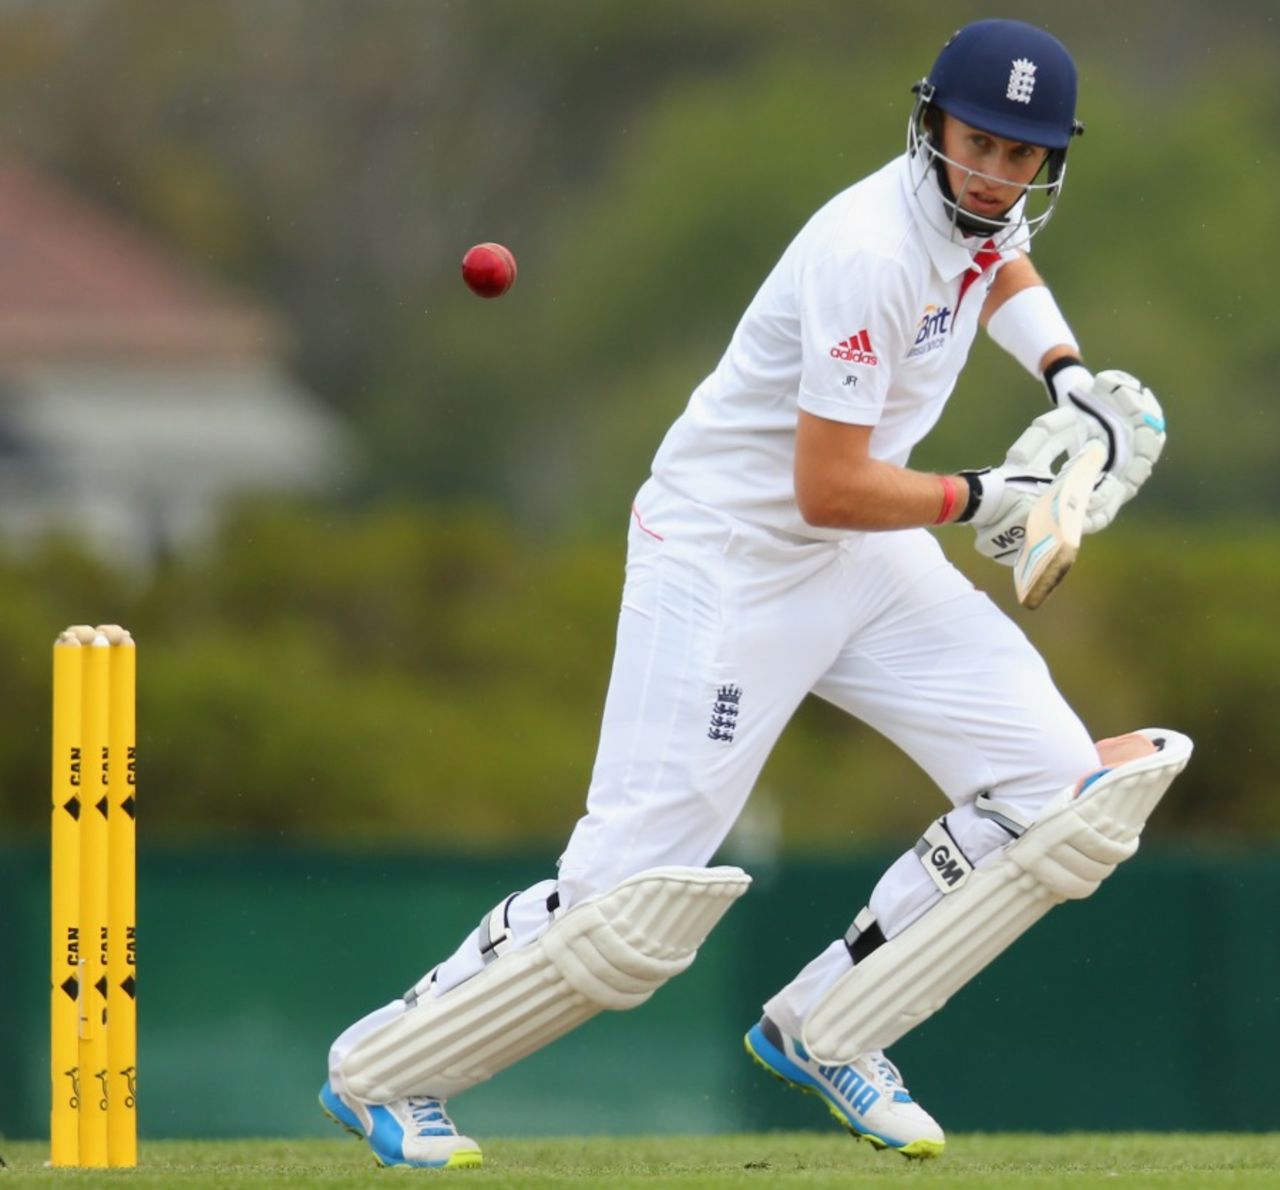 Joe Root pushes one to the off side, Australia A v England, Hobart, 4th day, November 9, 2013